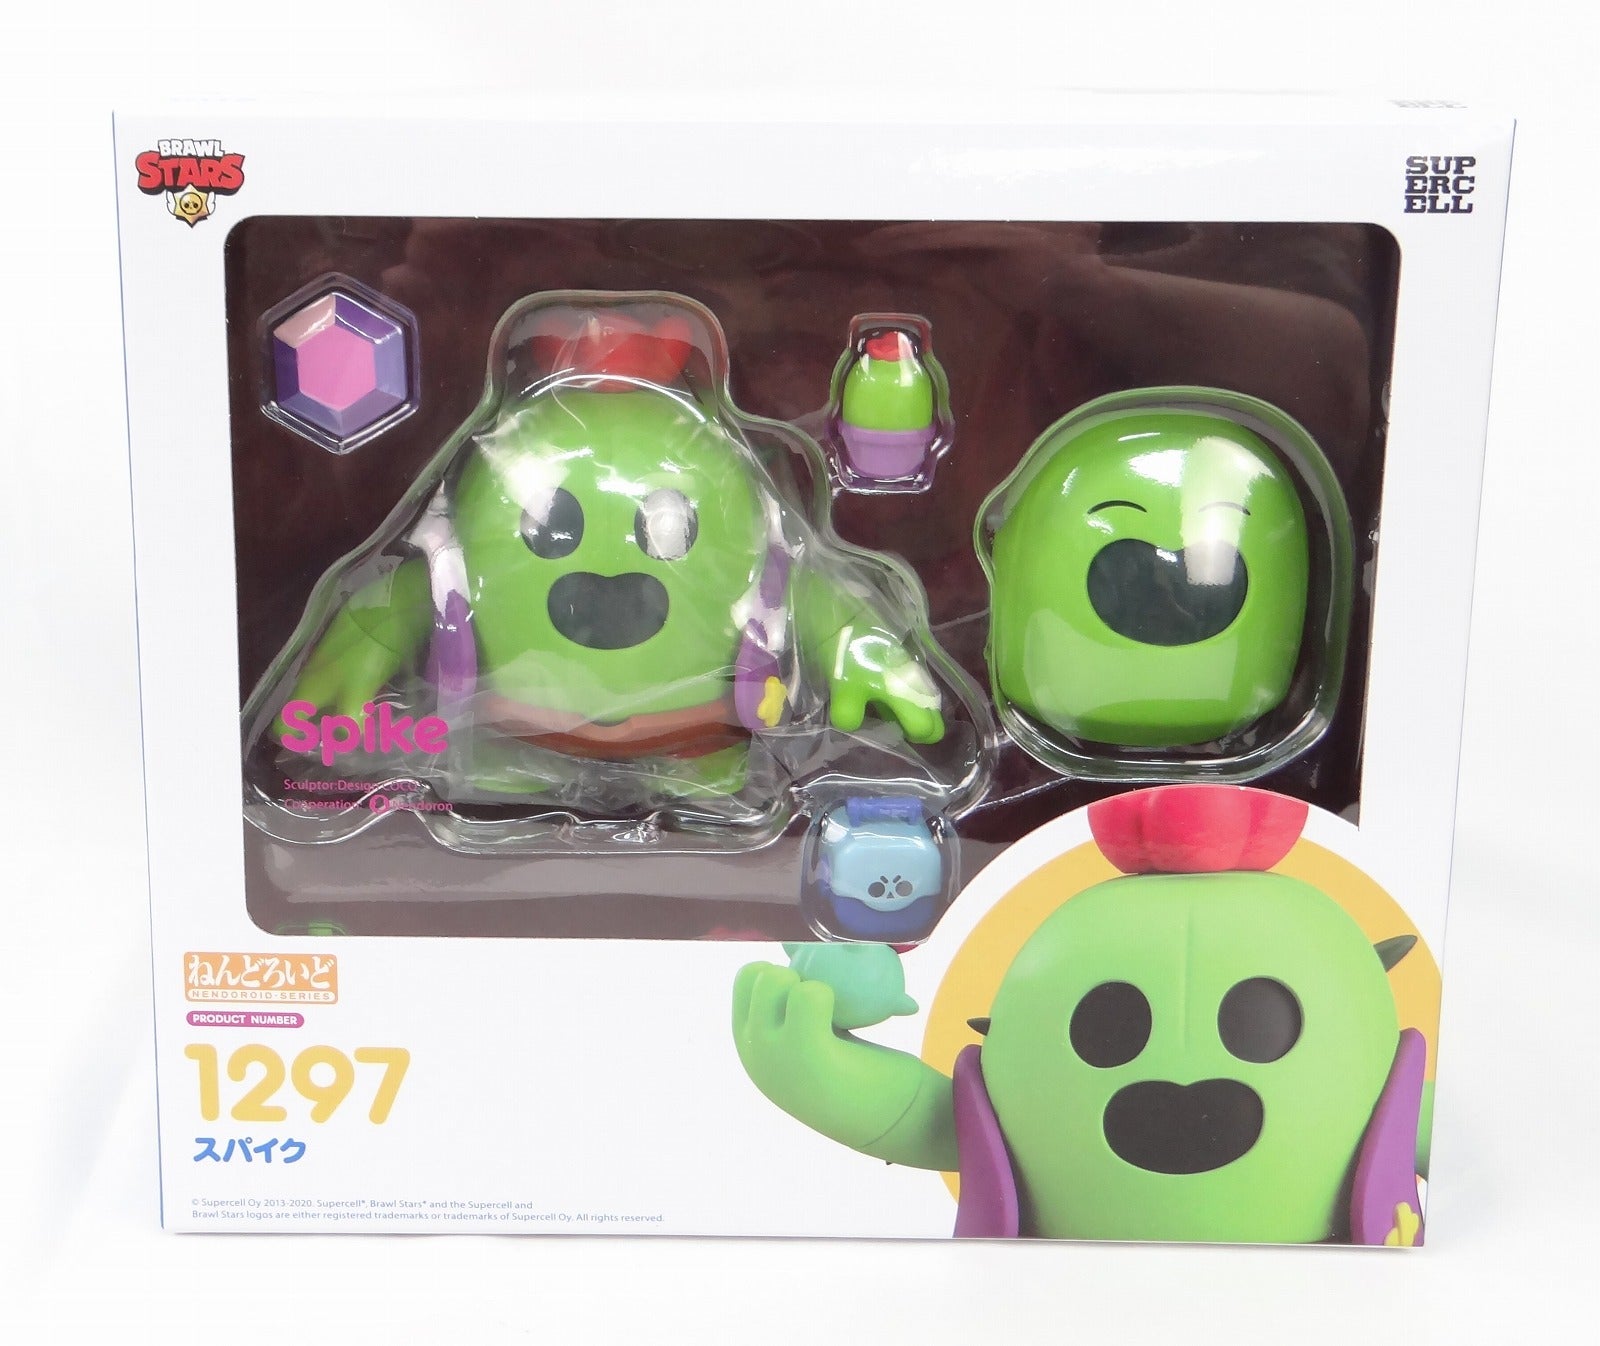 New Supercell Brawl Stars SPIKE Figure Nendoroid 1297 Collectible